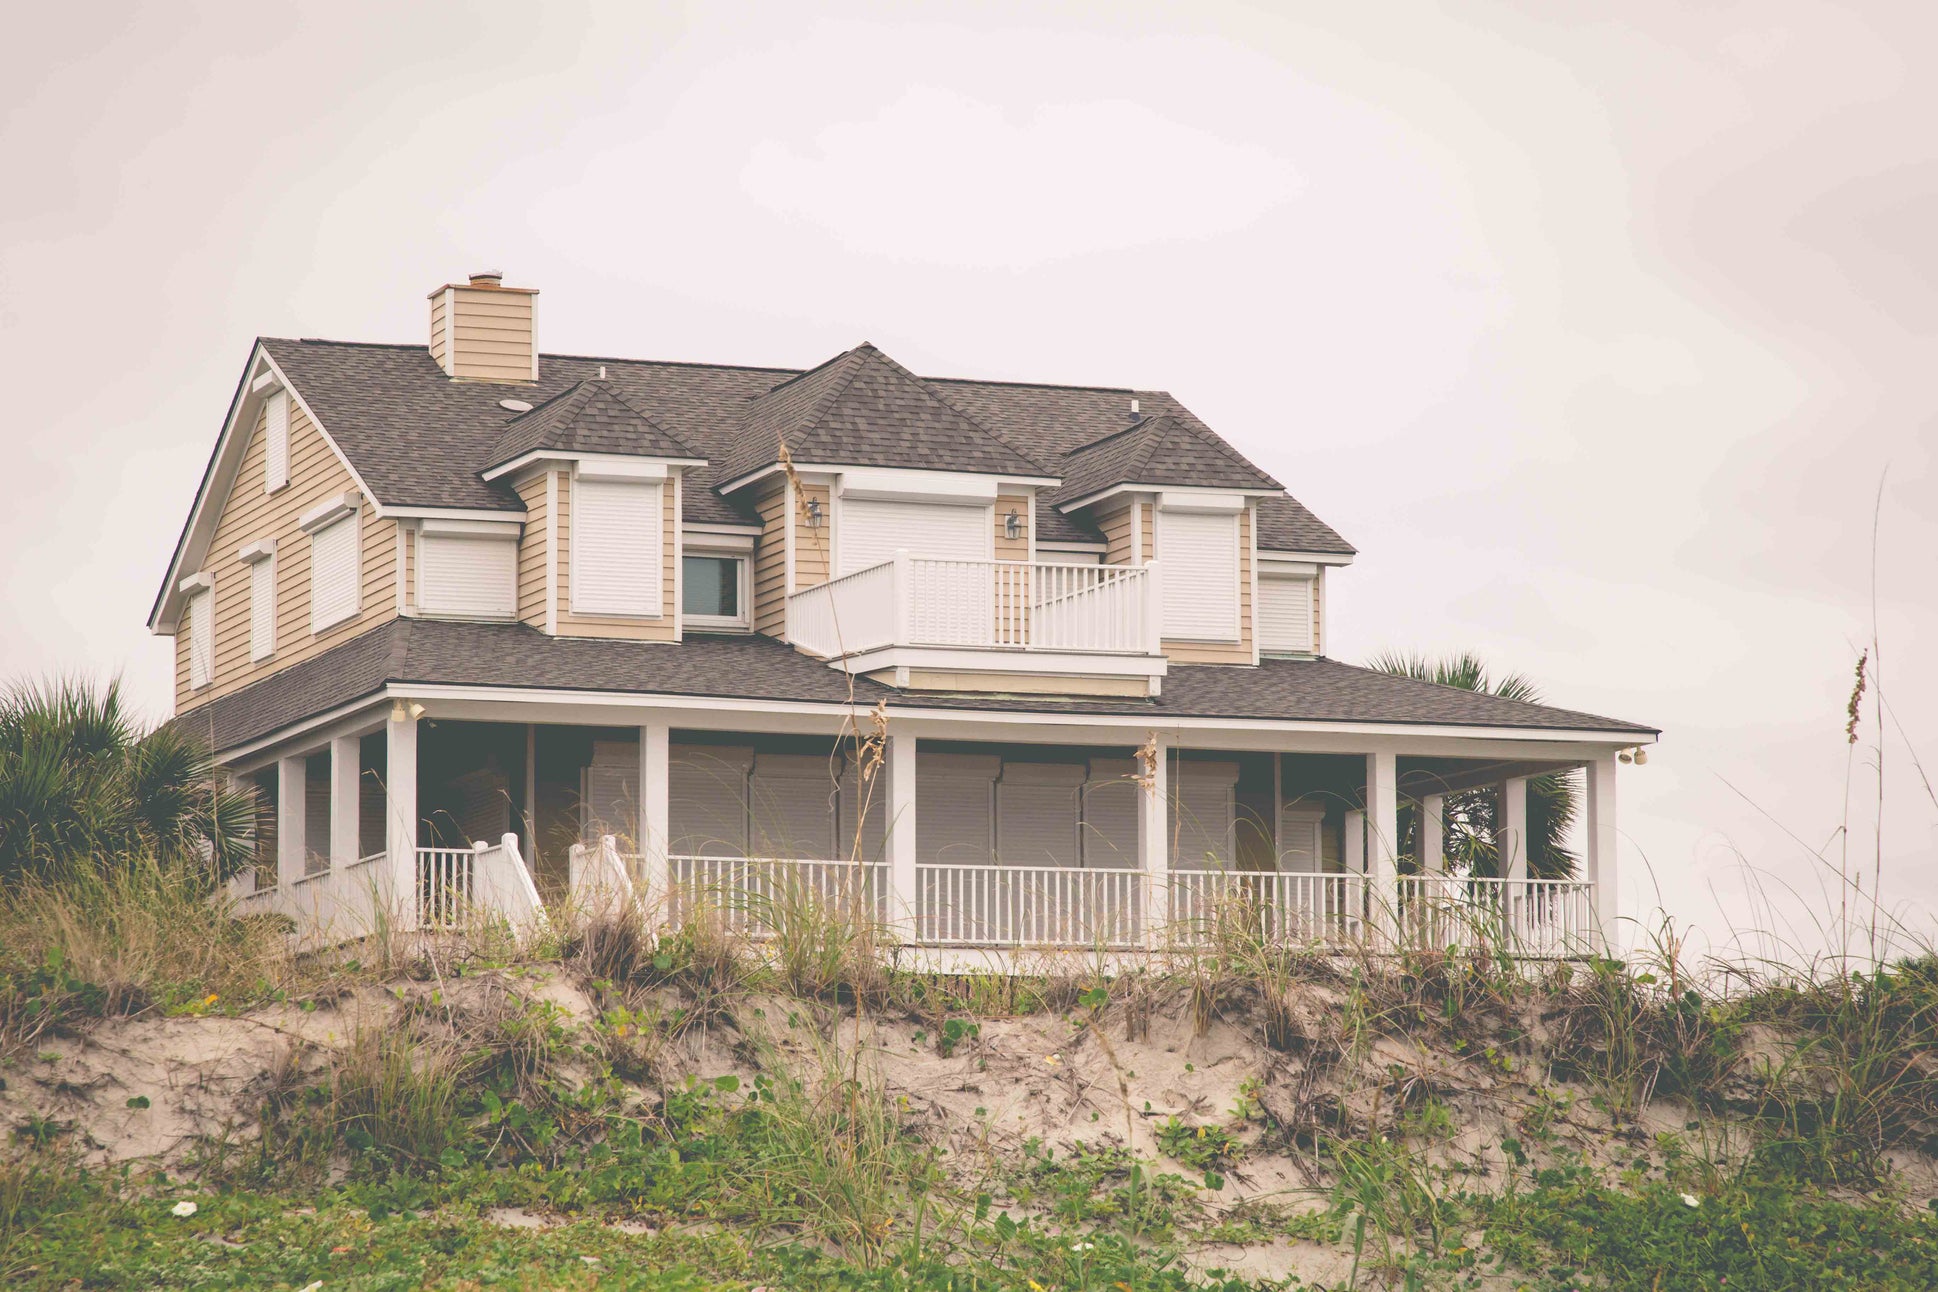 A two-story coastal home with hurricane shutters